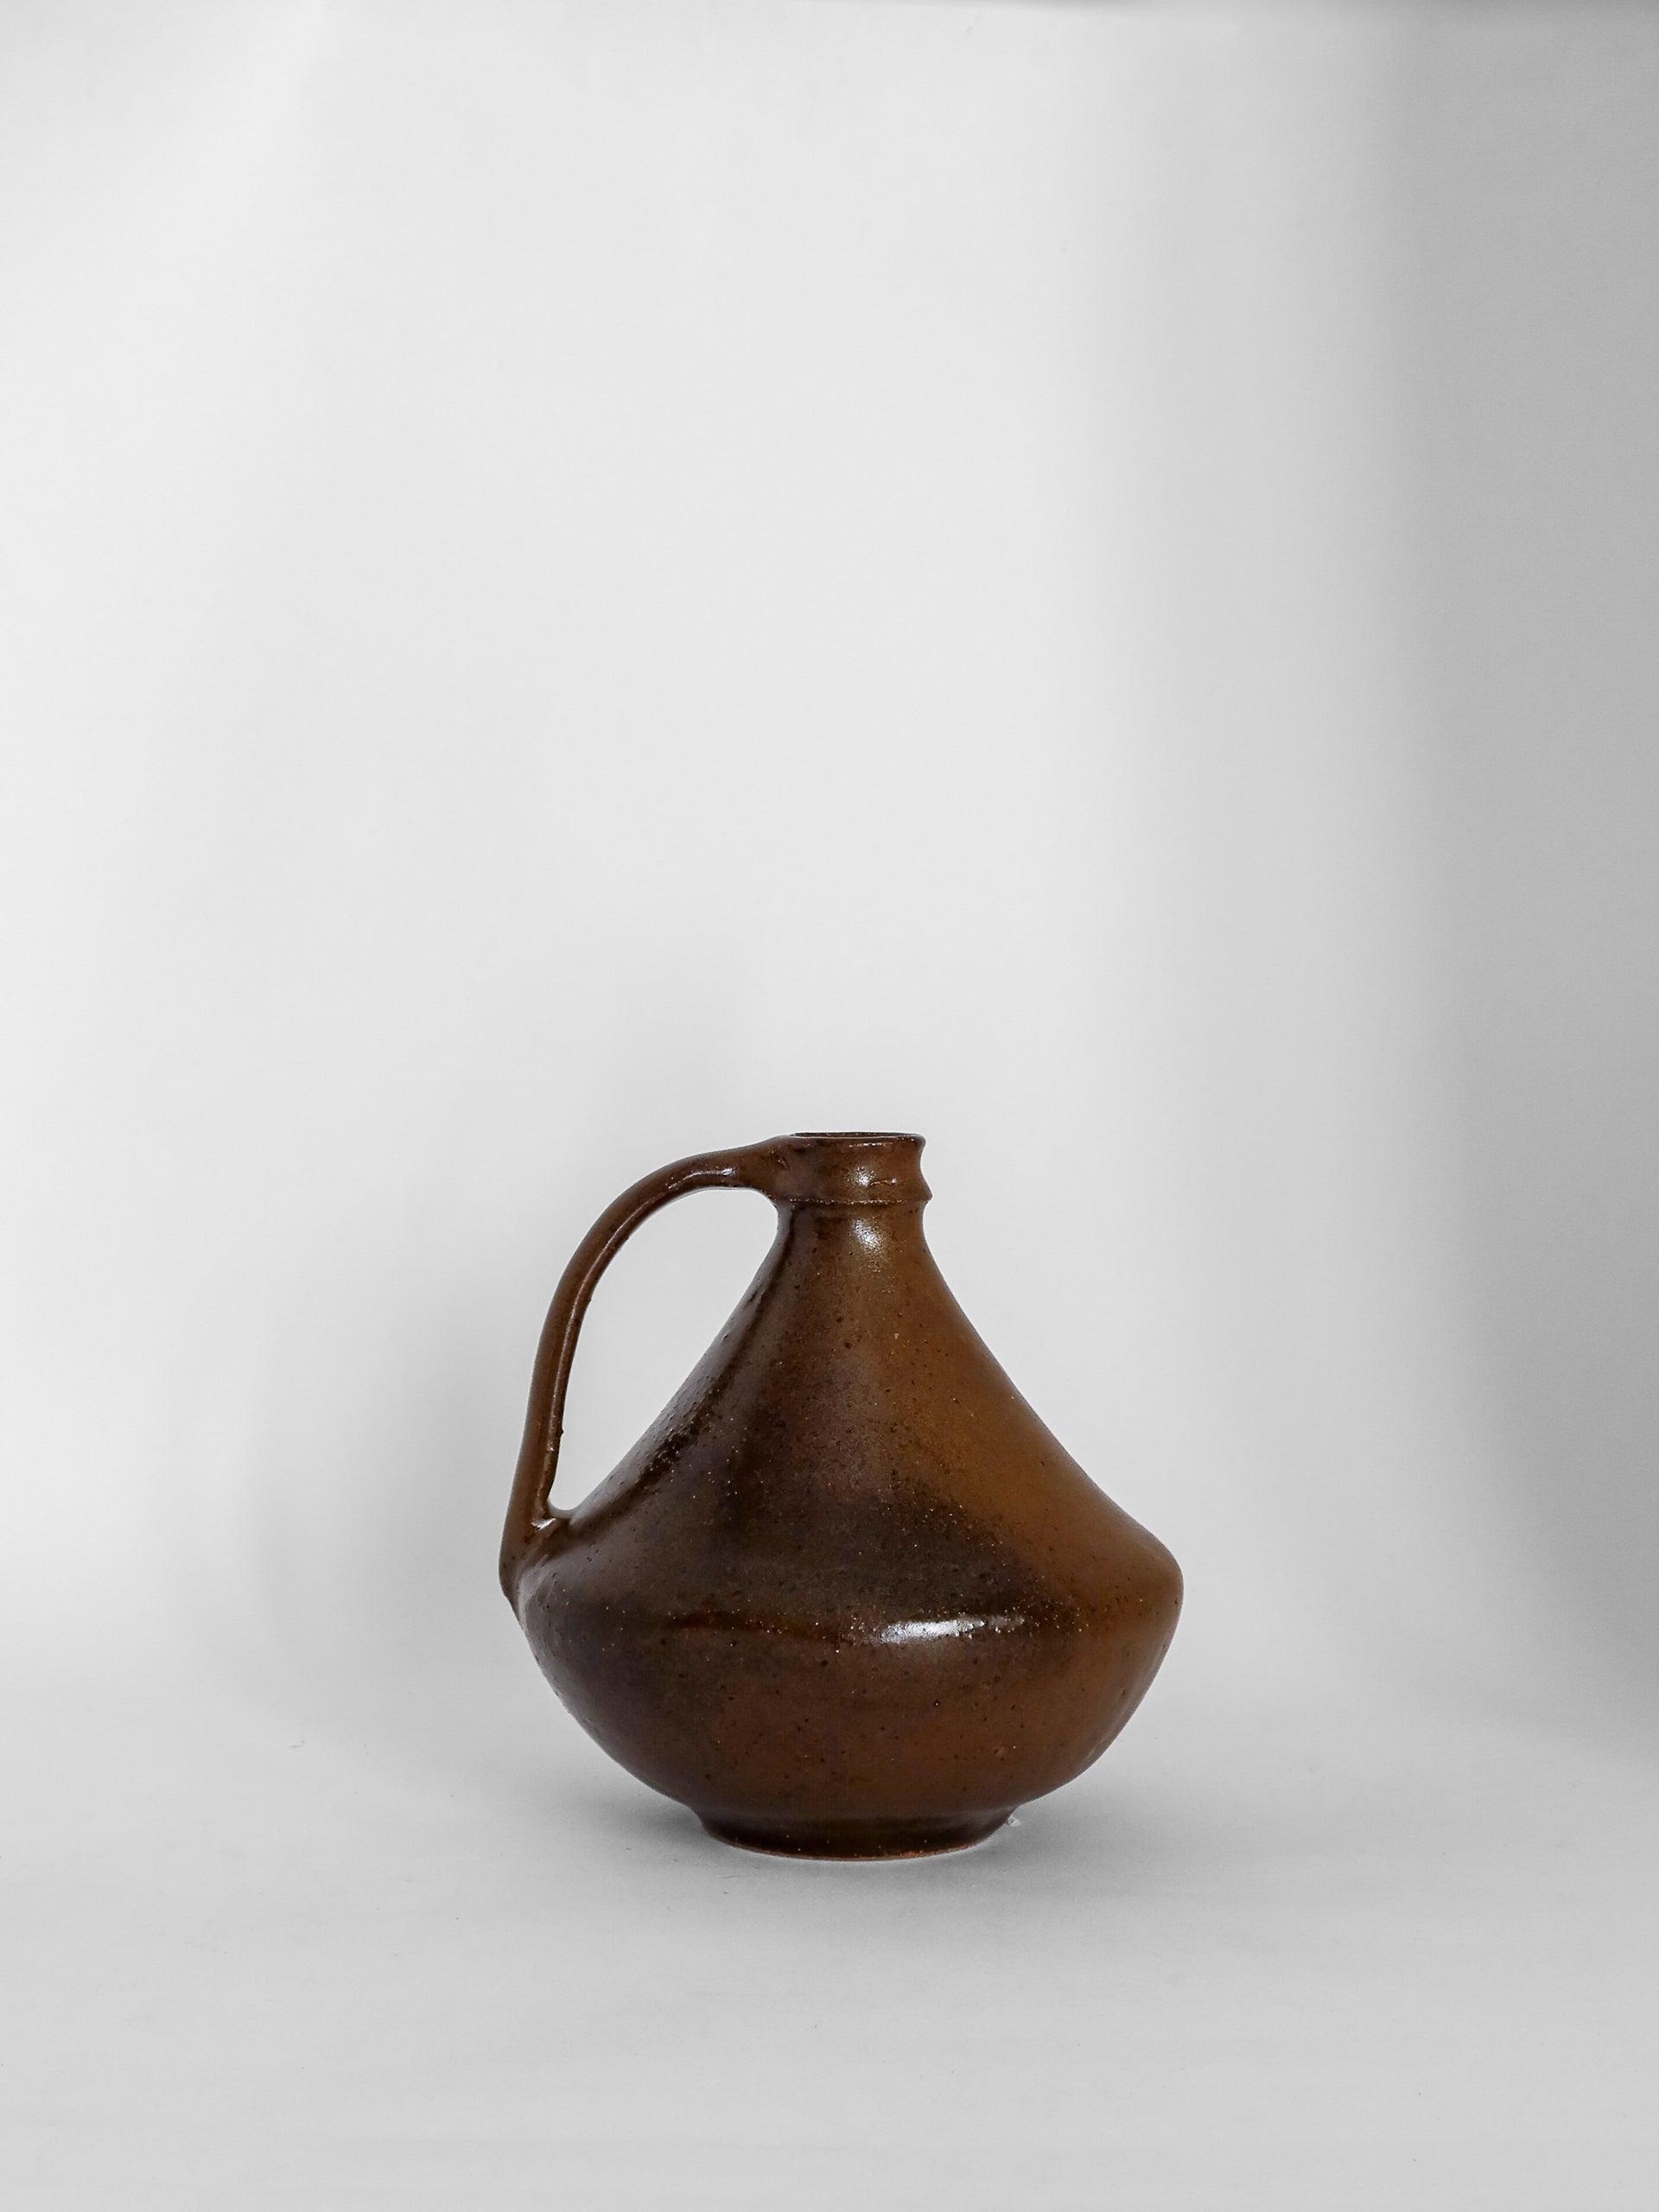 The-Lair-BRB-Ceramics-Small-Vase-Golden-Brown-005